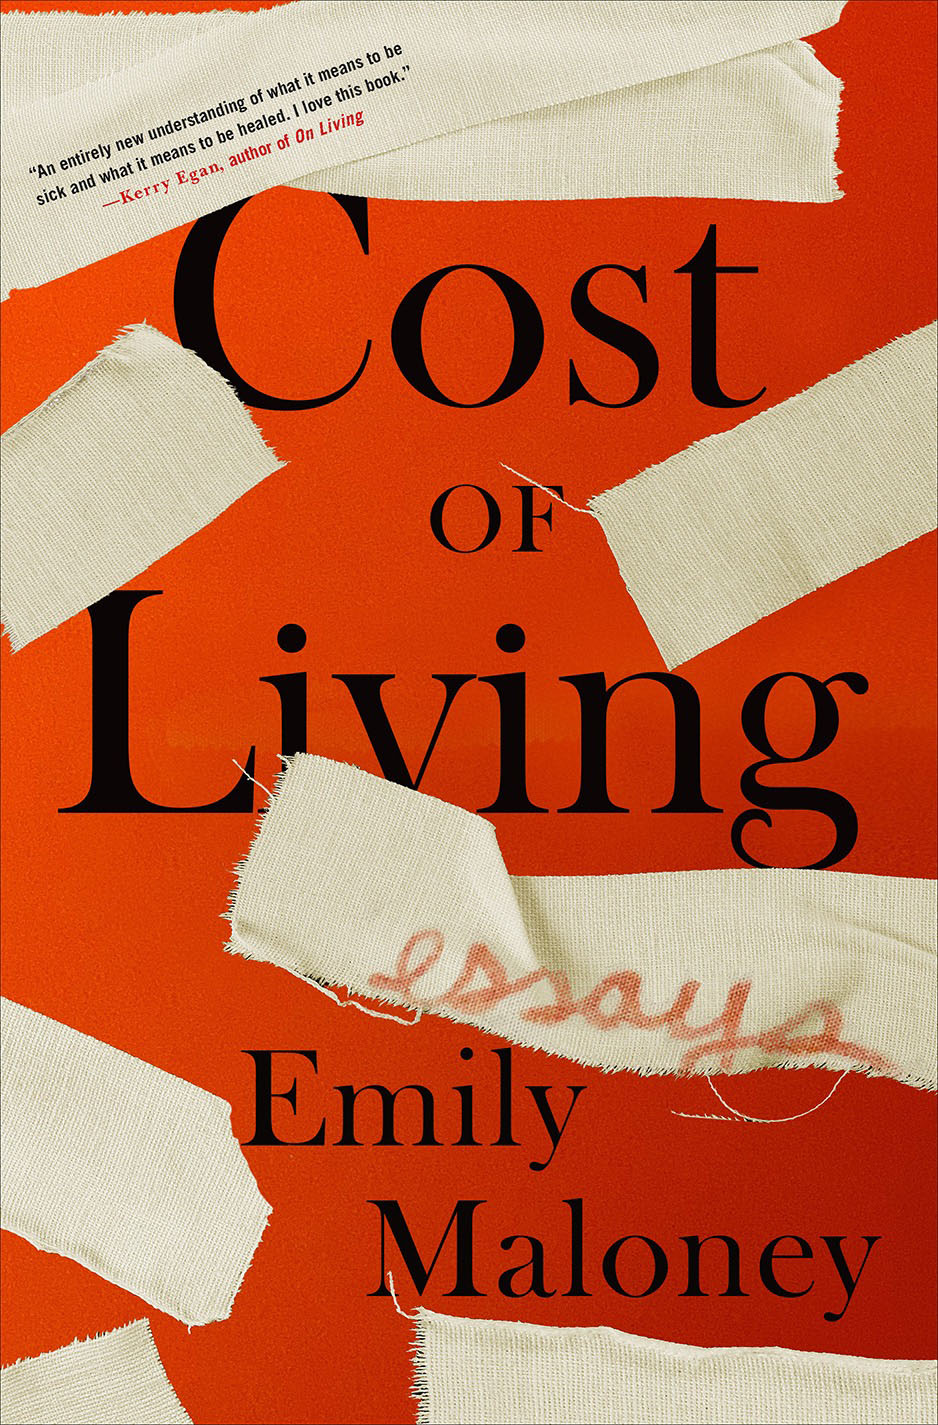 Cost_of_Living_hardcover_jacket_design_cover_smaller